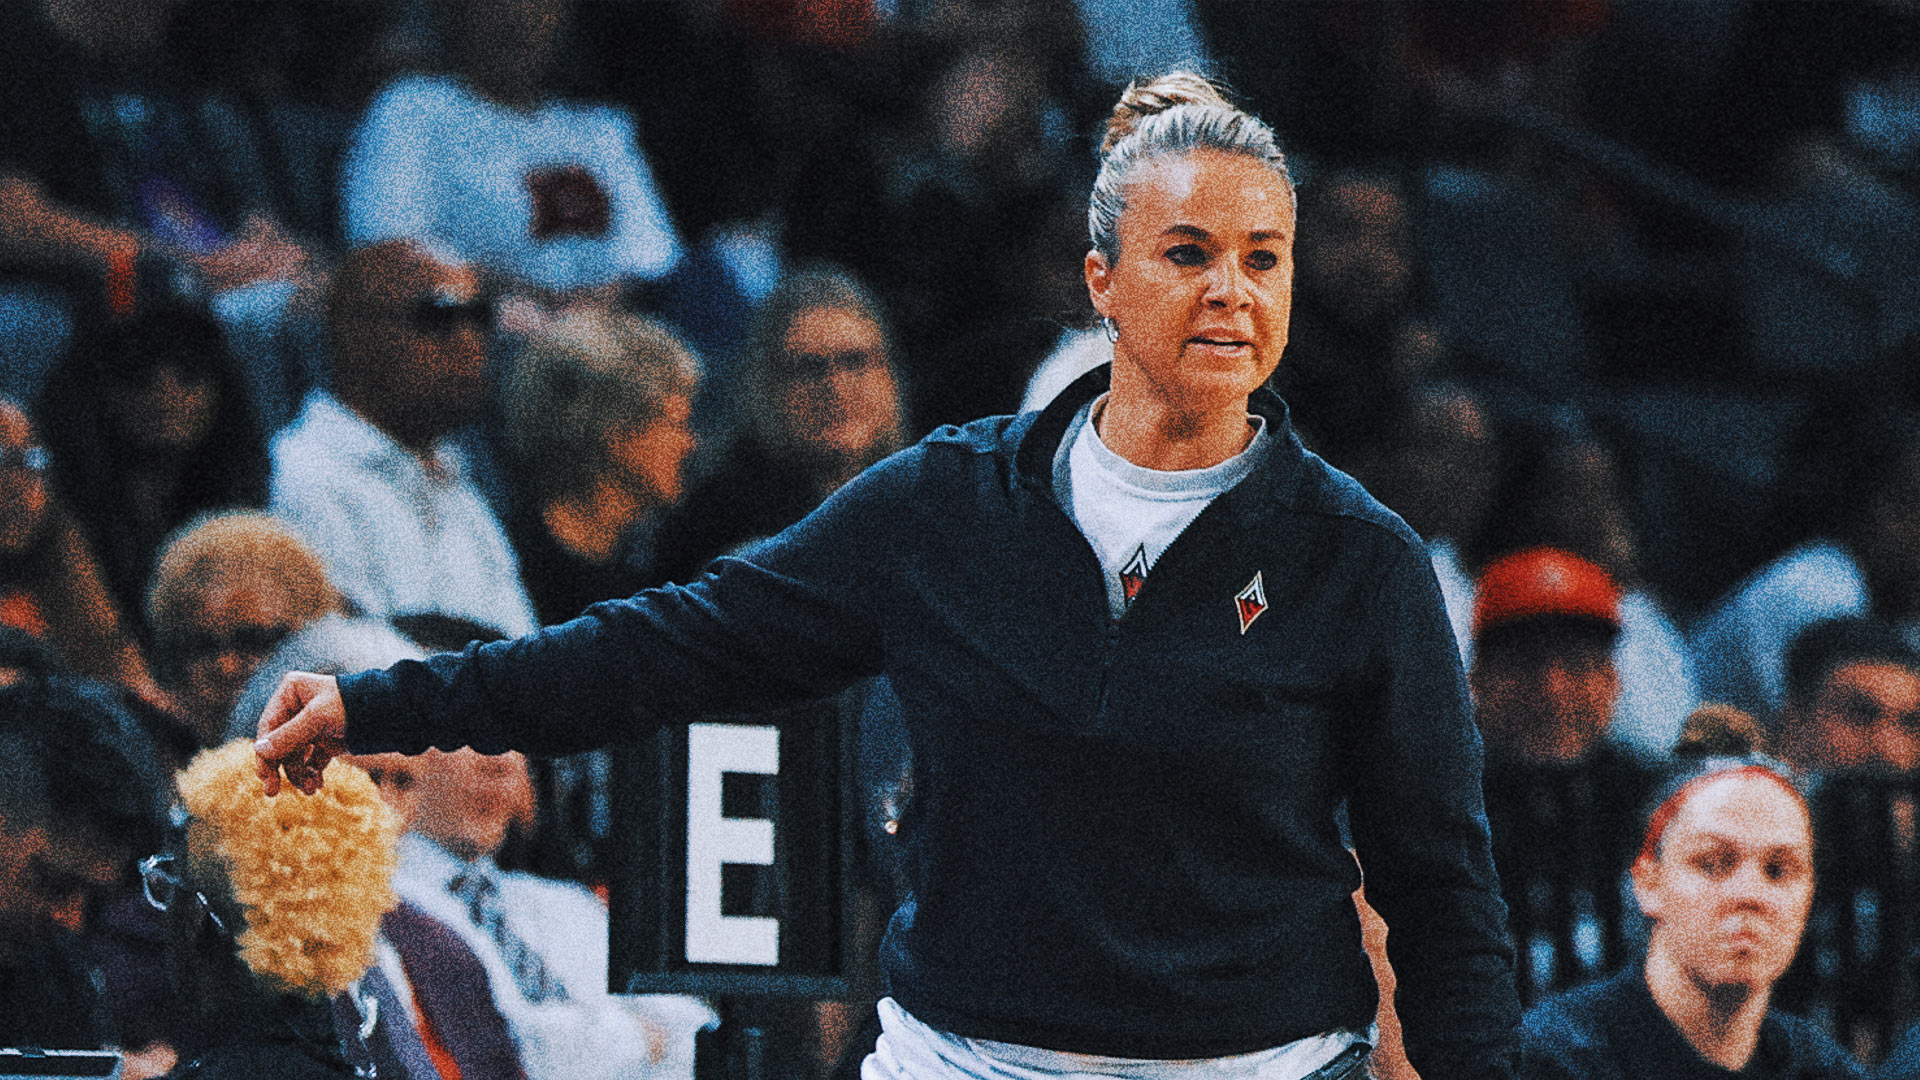 WNBA suspends Becky Hammon 2 games, Aces lose draft pick after investigation